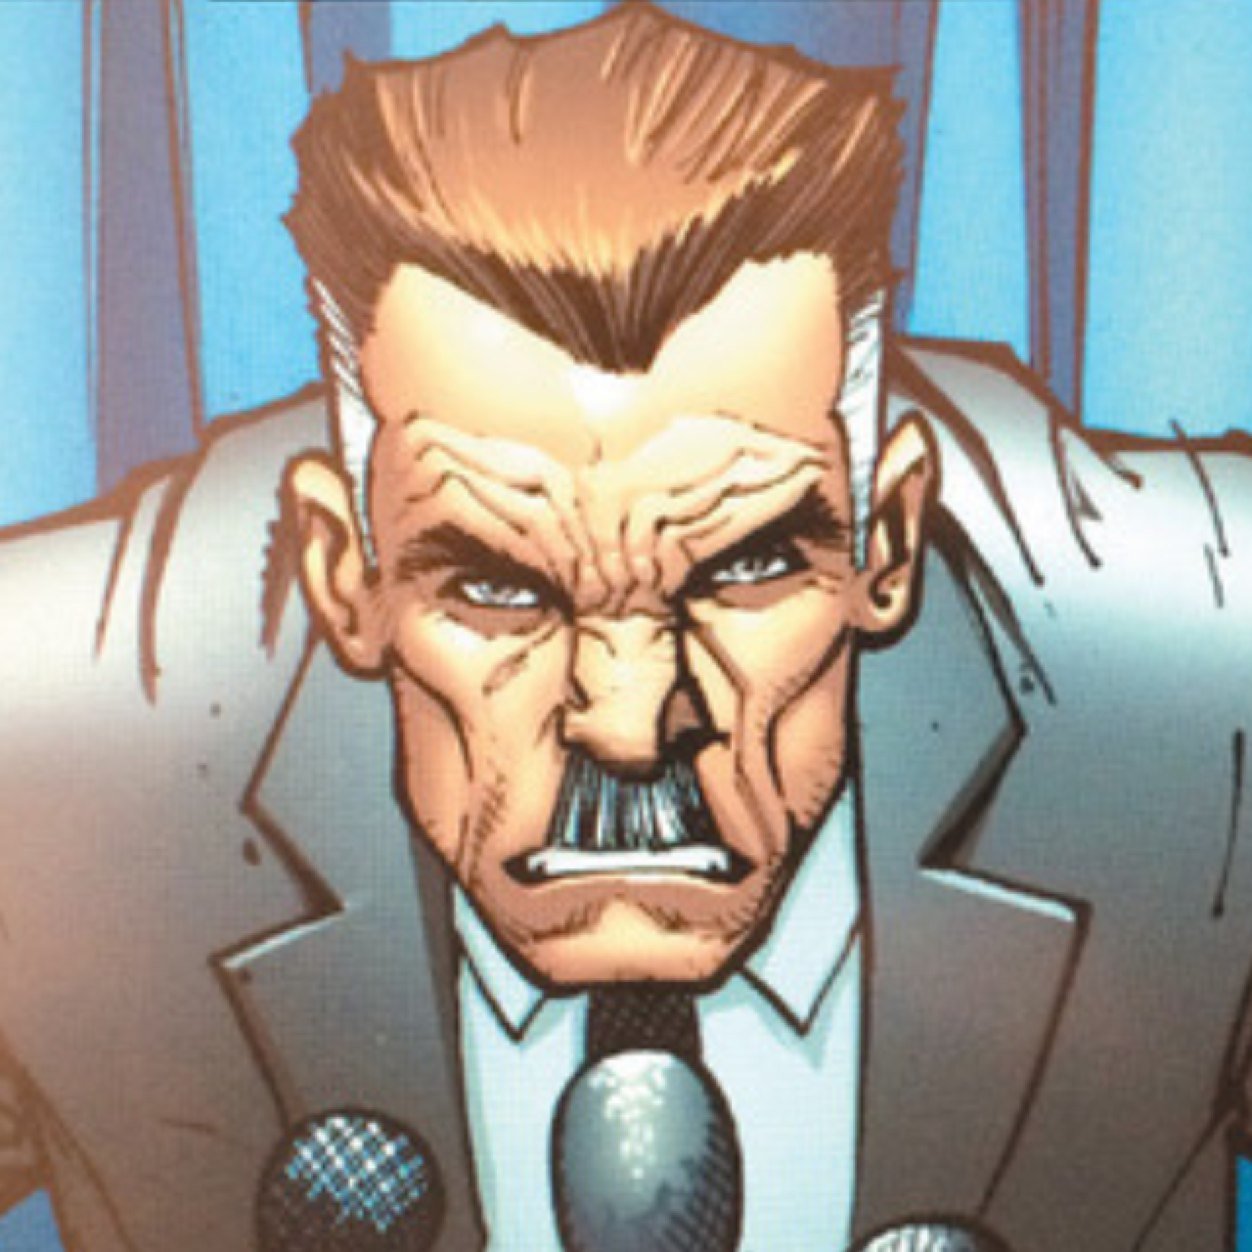 J. Jonah Jameson, publisher of the Daily Bugle. Wanna know anything else? No? Then SCRAM!